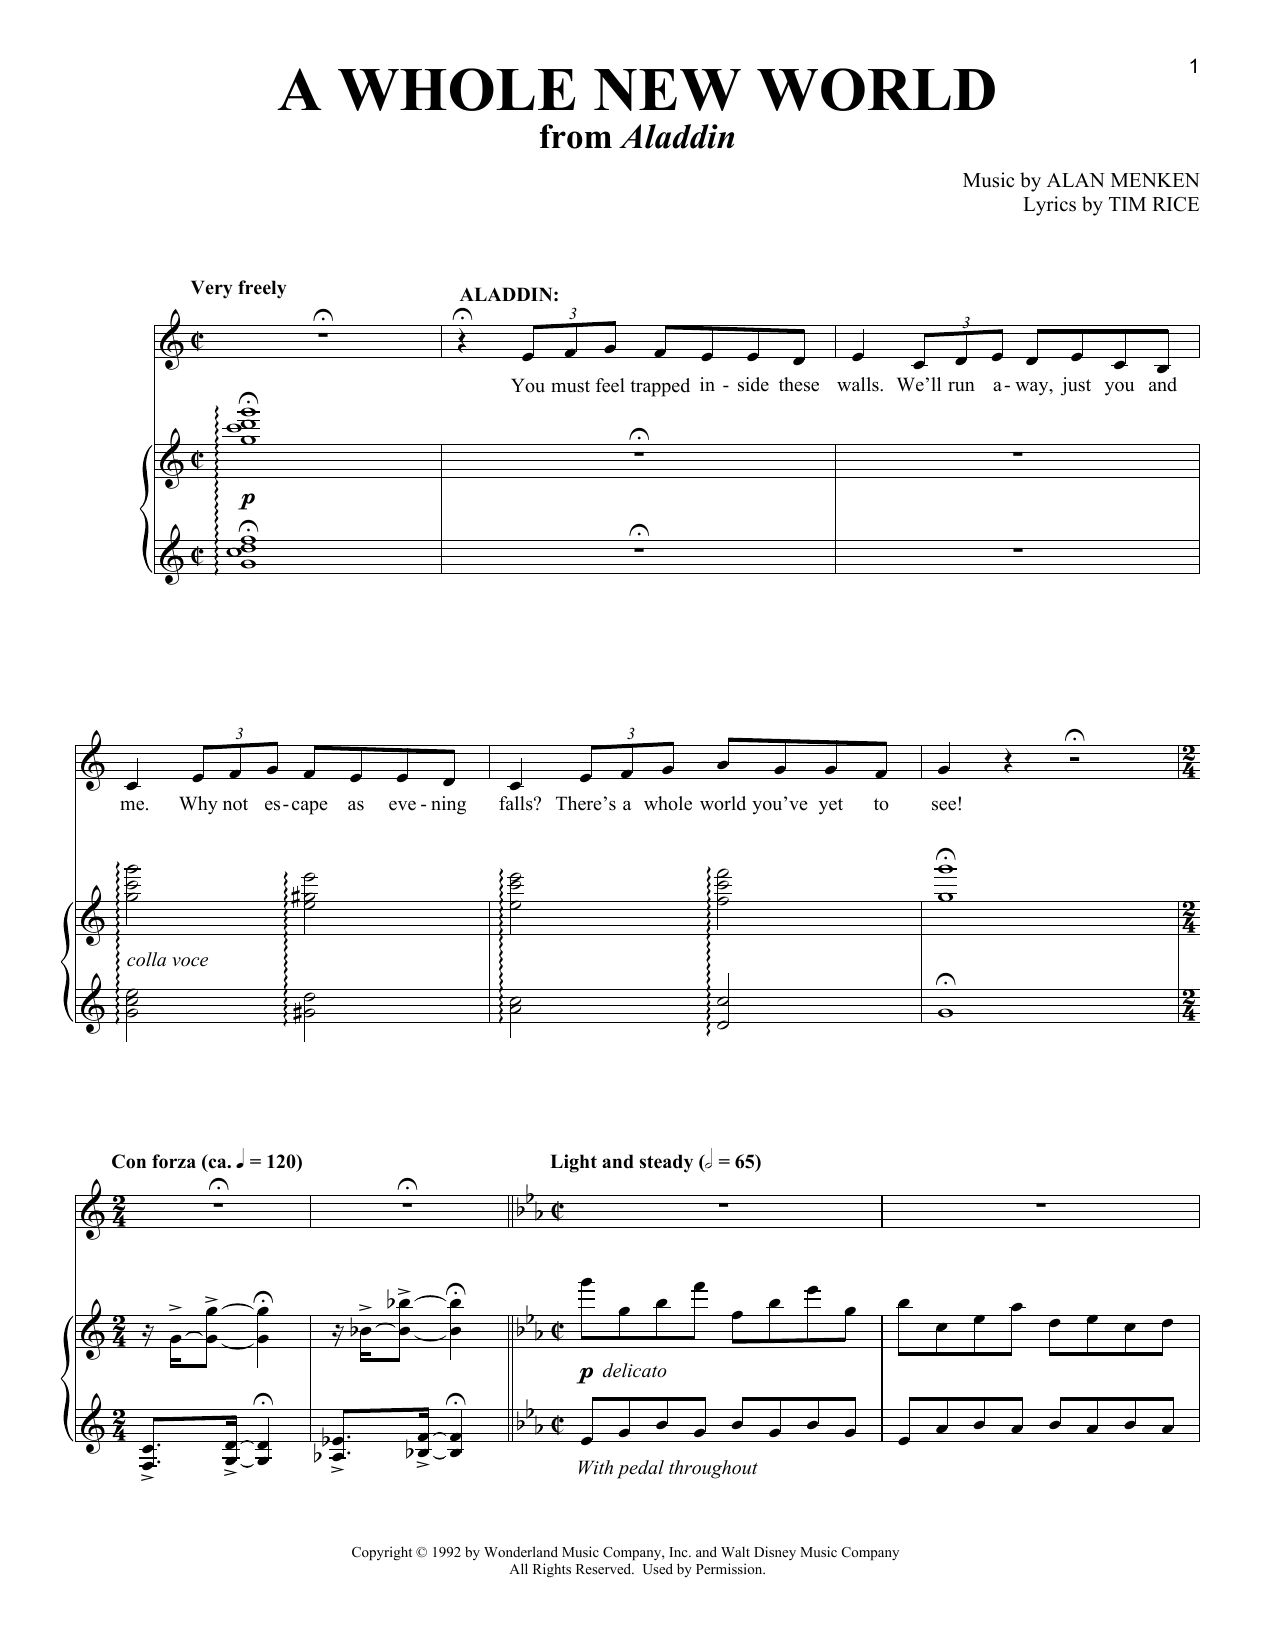 Alan Menken & Tim Rice A Whole New World (from Aladdin: The Broadway Musical) sheet music notes and chords. Download Printable PDF.